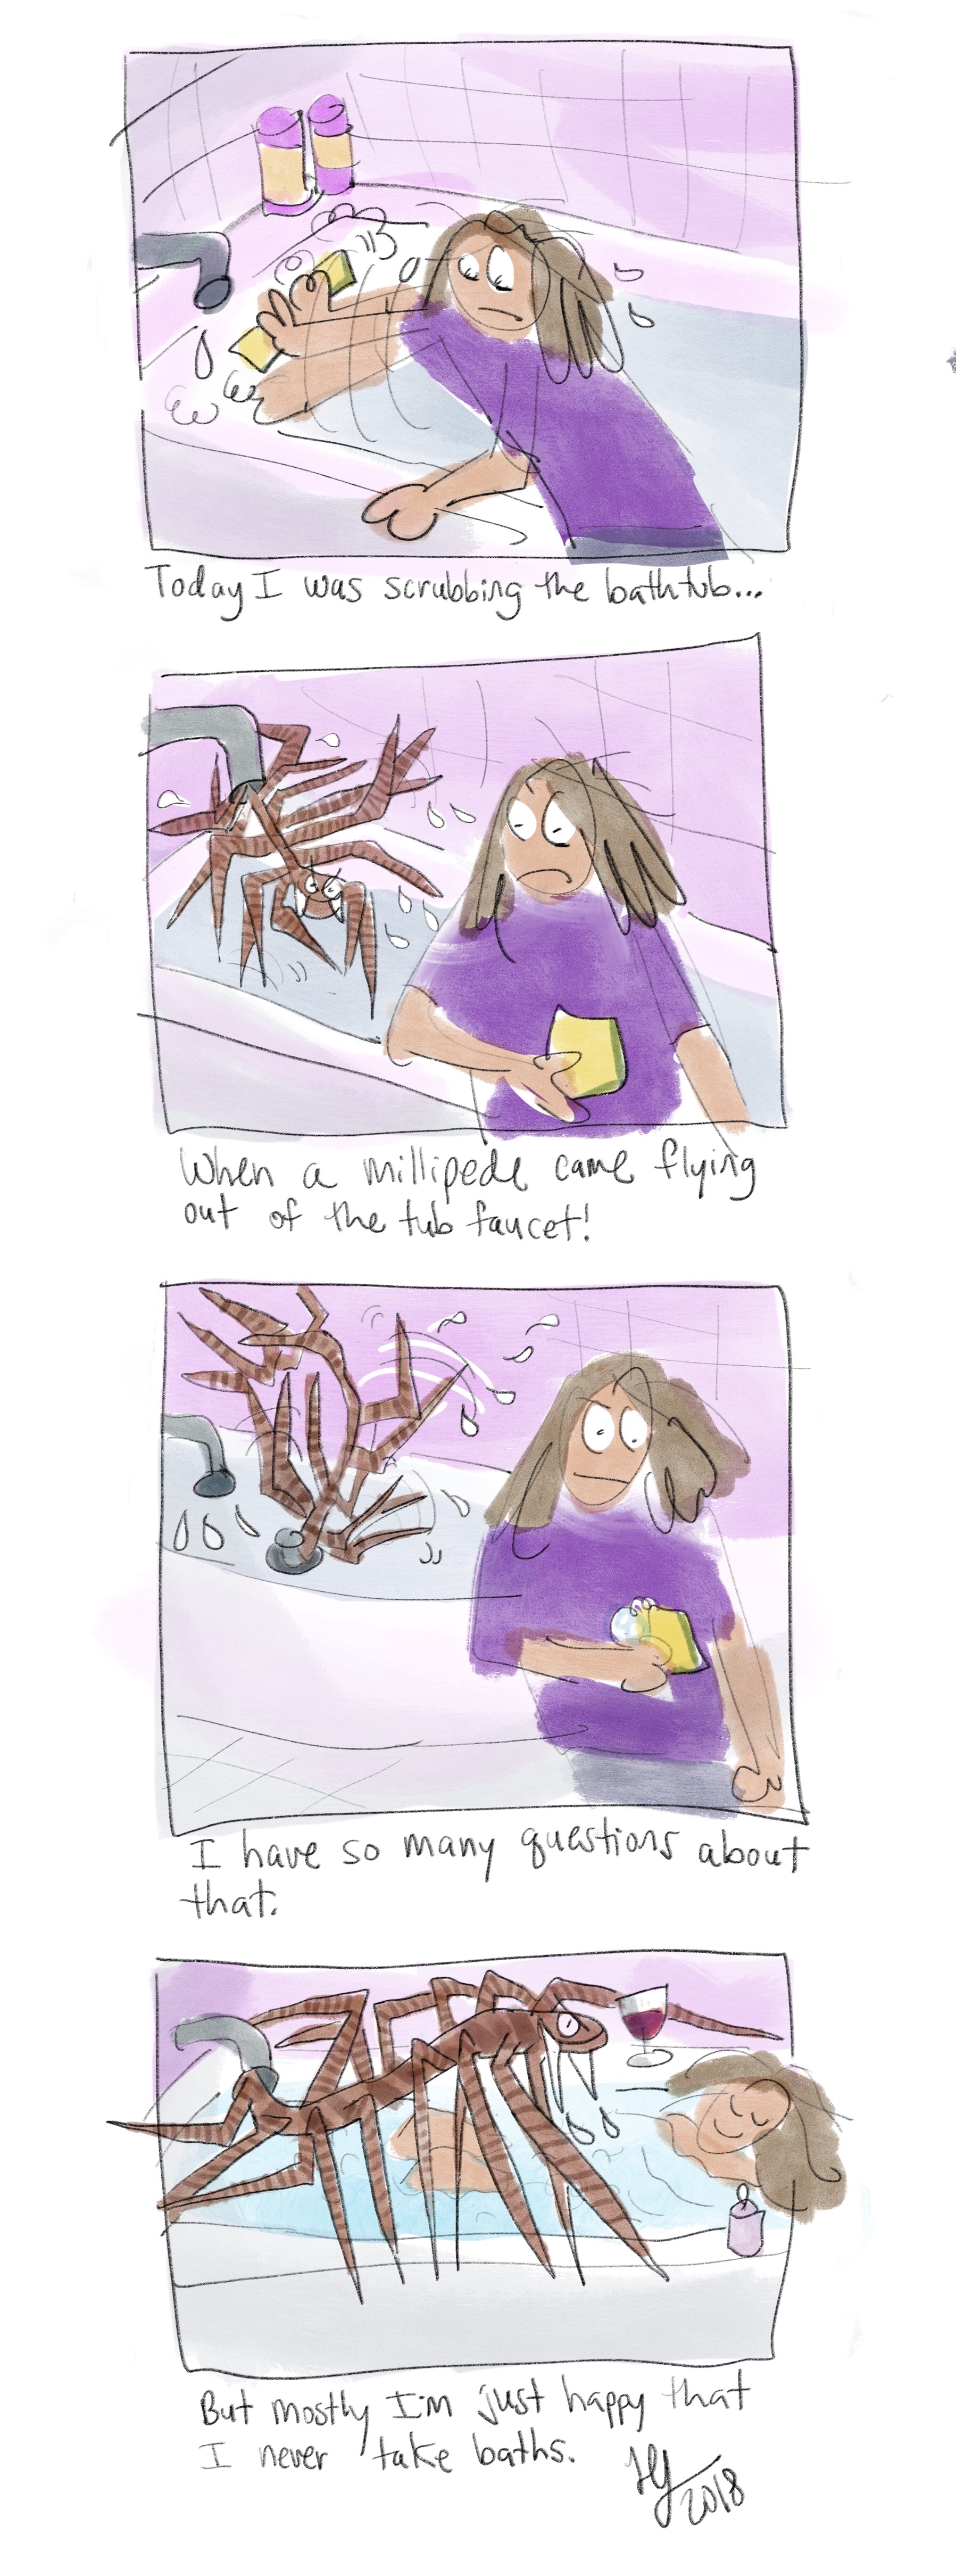 I like drawing comics about millipedes. I have not seen many since I moved, but a big one fell out of the bathtub faucet the other day. 